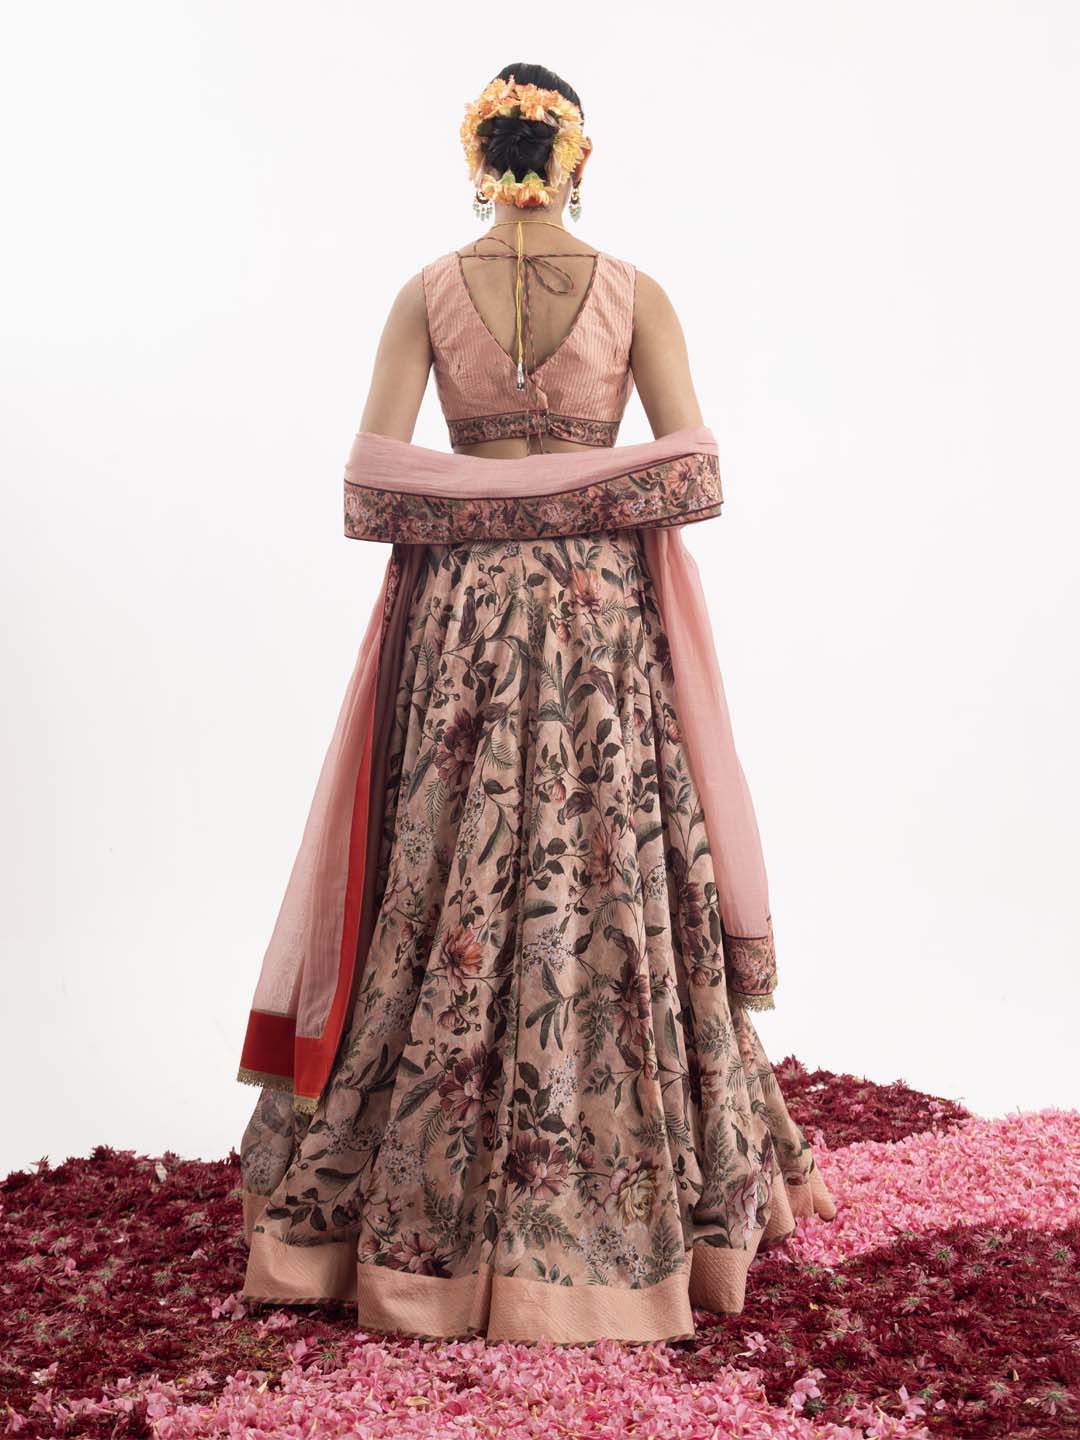 Printed lehenga offering a perfect blend of traditional elegance and contemporary styles.